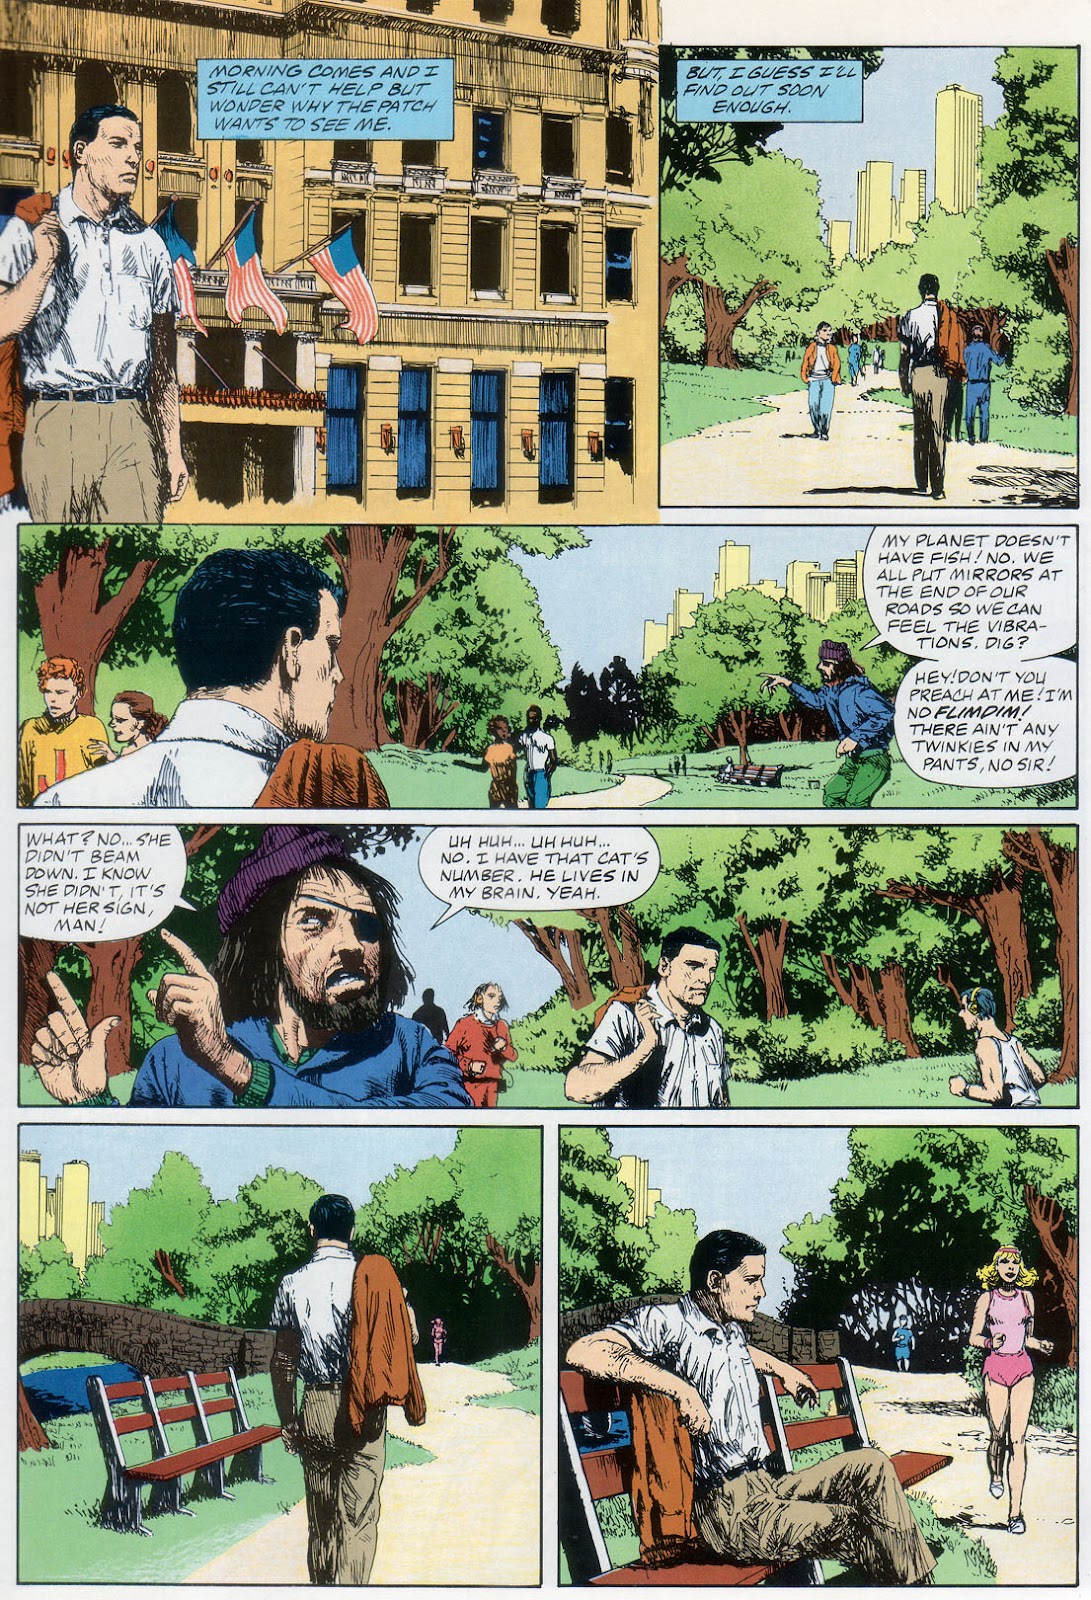 Marvel Graphic Novel issue 57 - Rick Mason - The Agent - Page 23